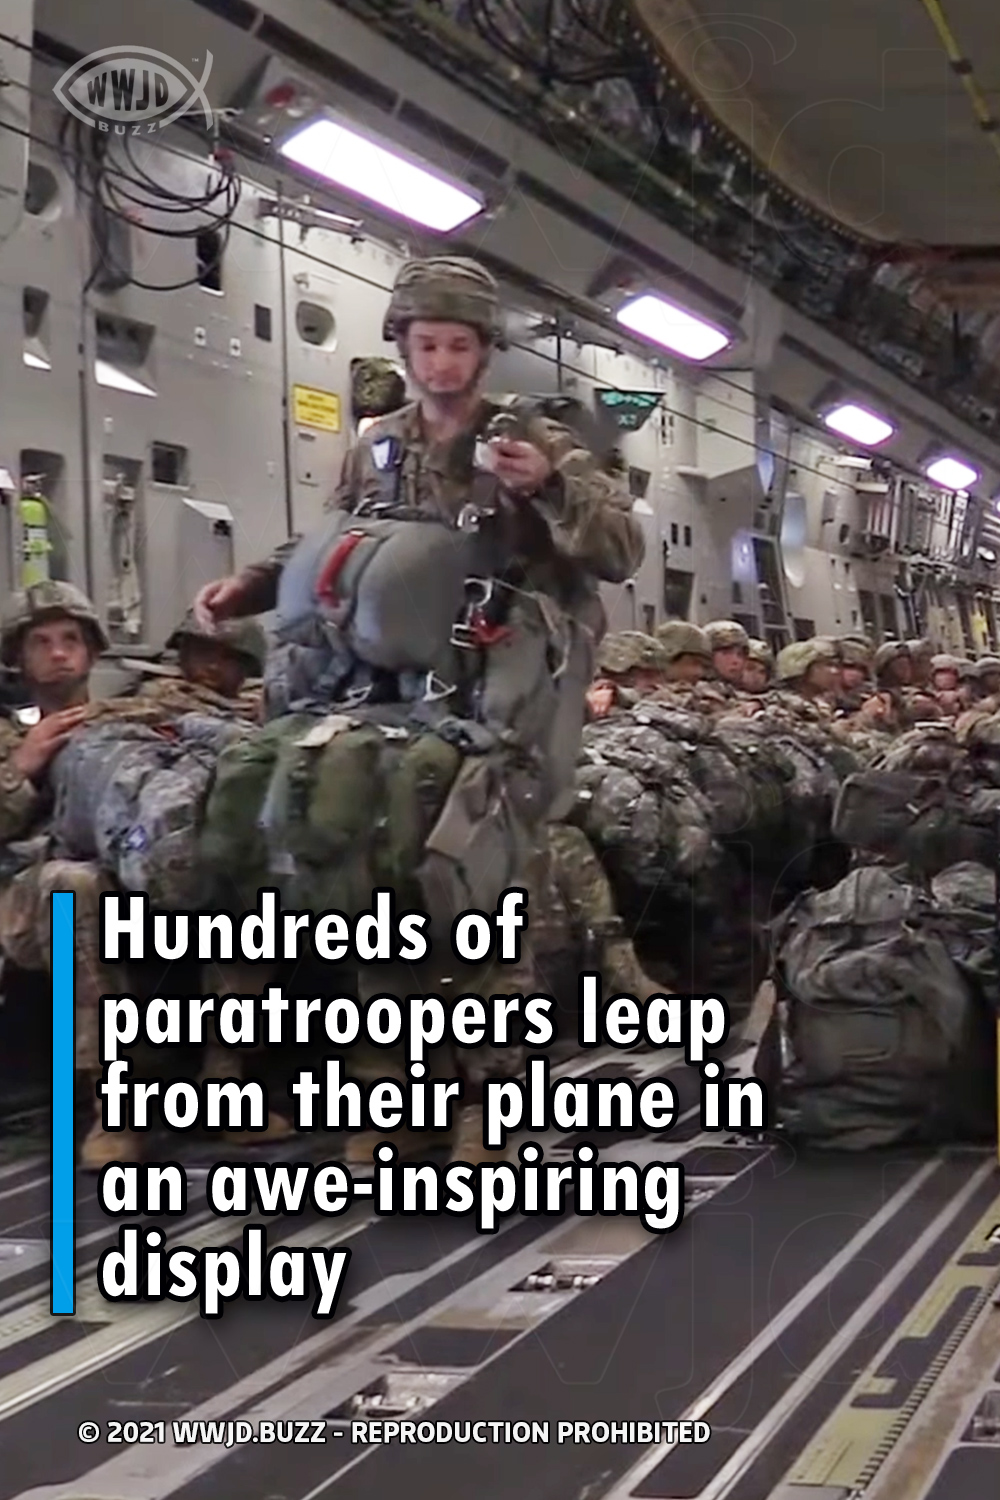 Hundreds of paratroopers leap from their plane in an awe-inspiring display